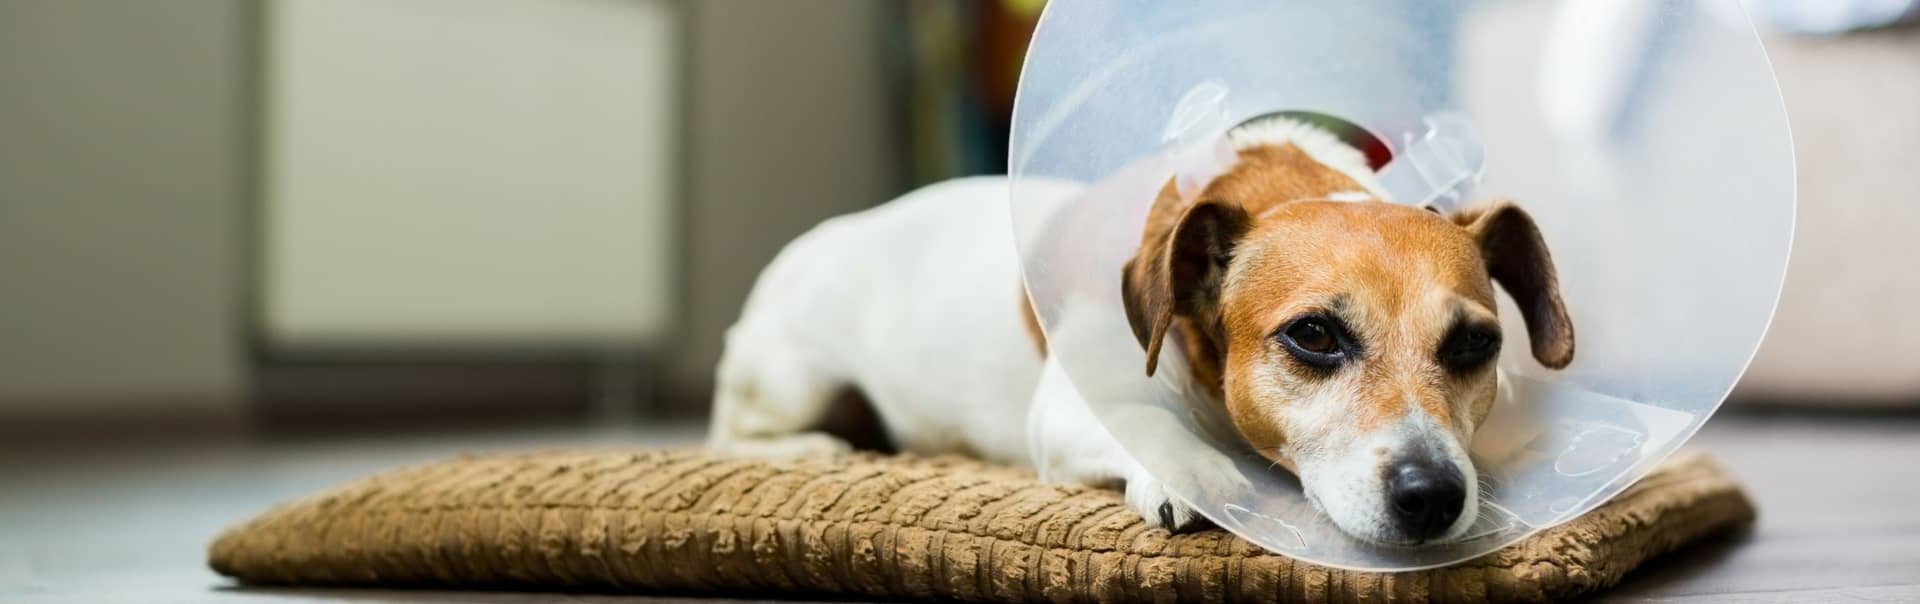 Endoscopy Services for Pets